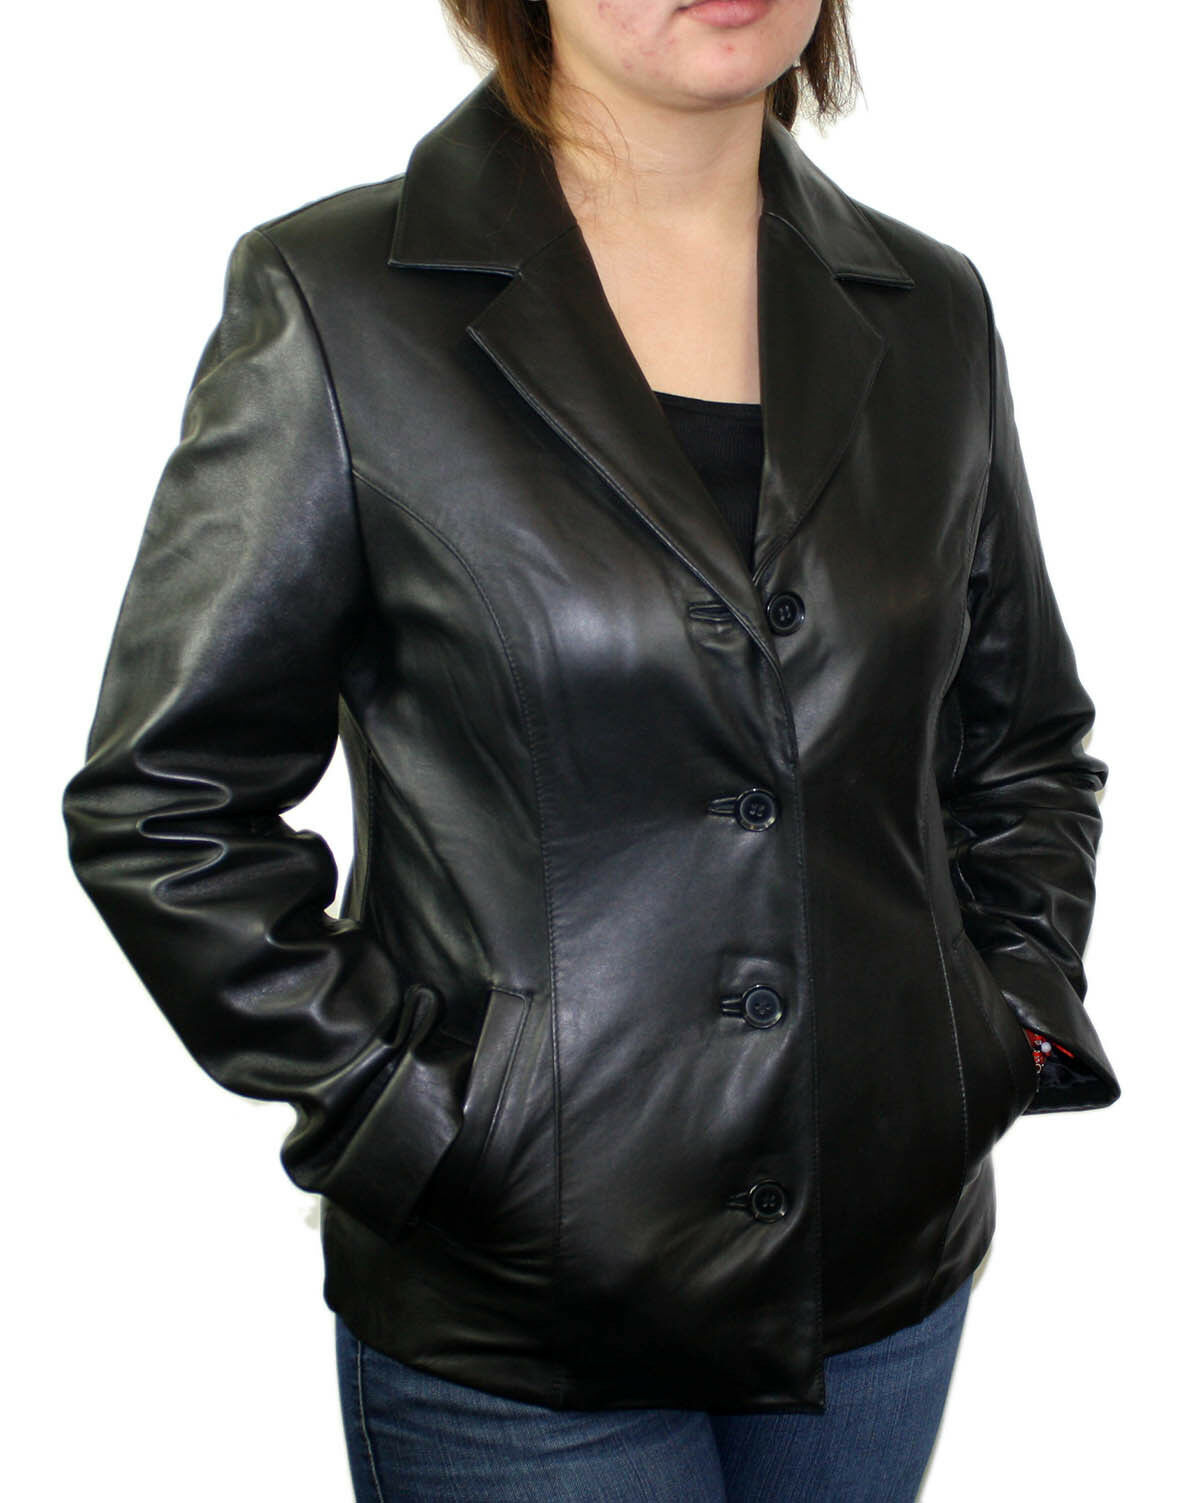 Ladies Lamb Leather Coat with 4 Button Closure Nice Fitted